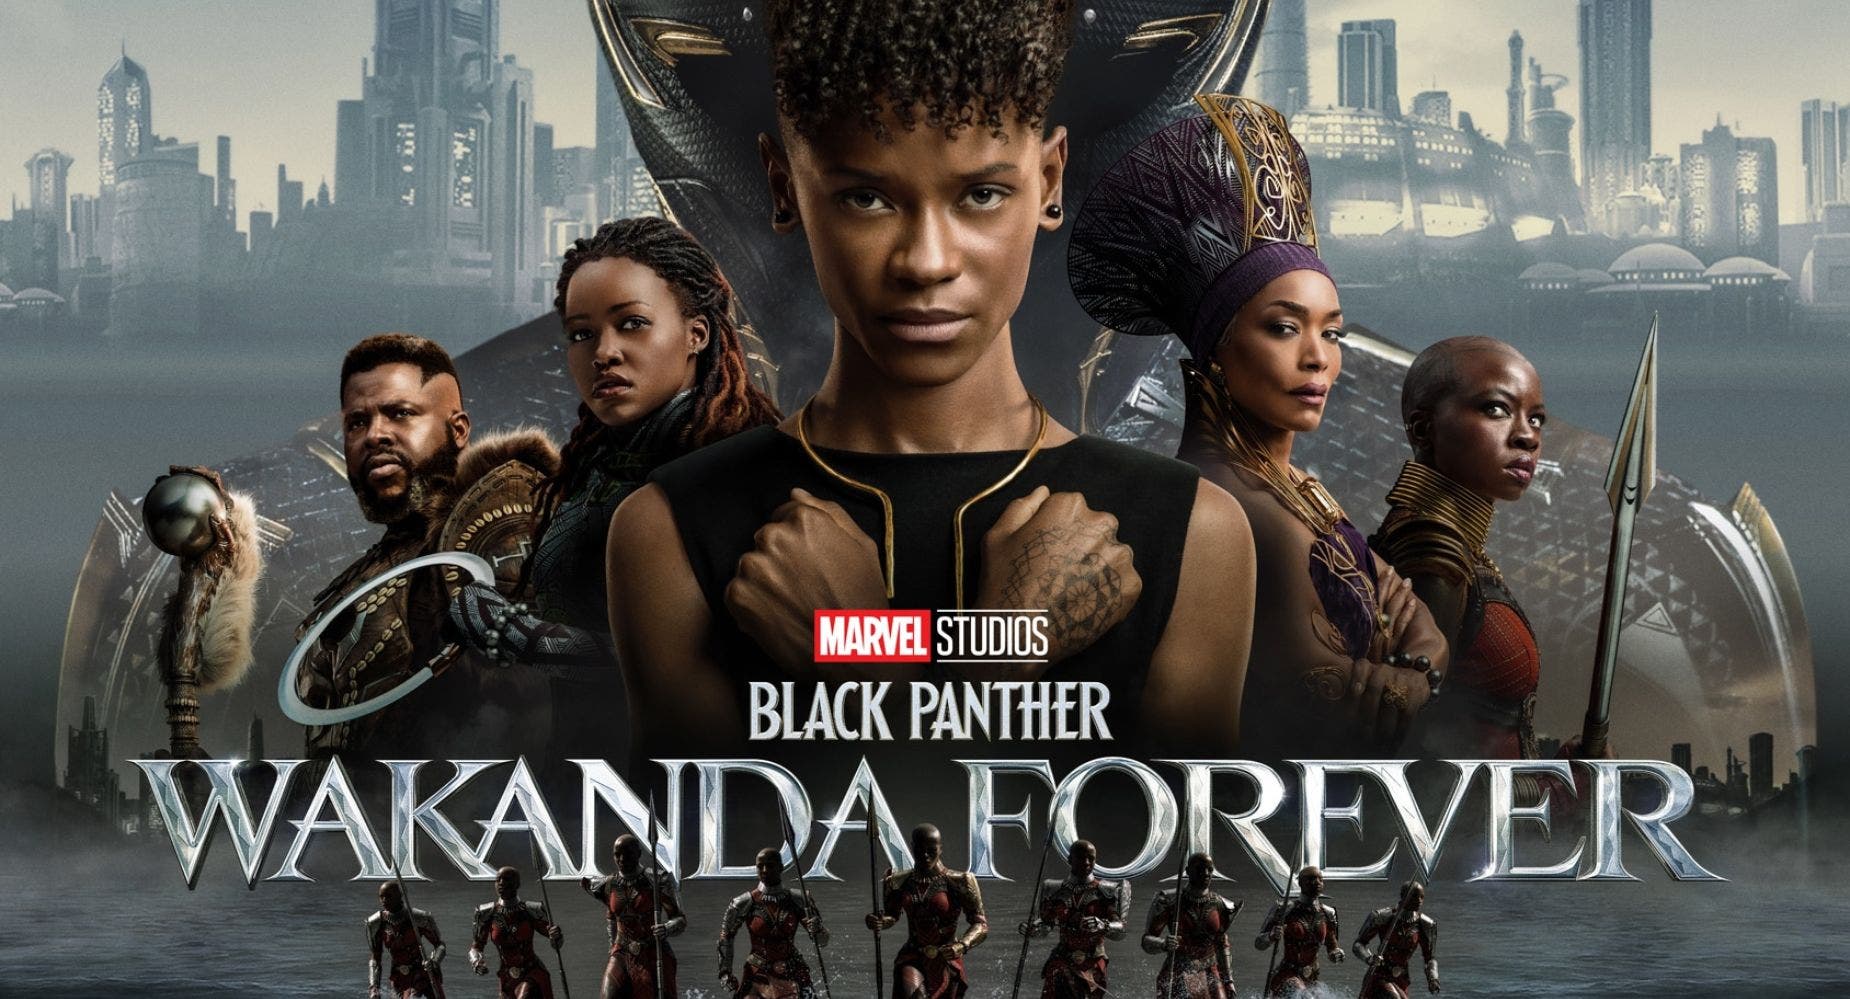 Wakanda Forever! Black Panther Sequel Sets November Box Office Record, Could It Help Give Disney Shares A Boost In Week Ahead?